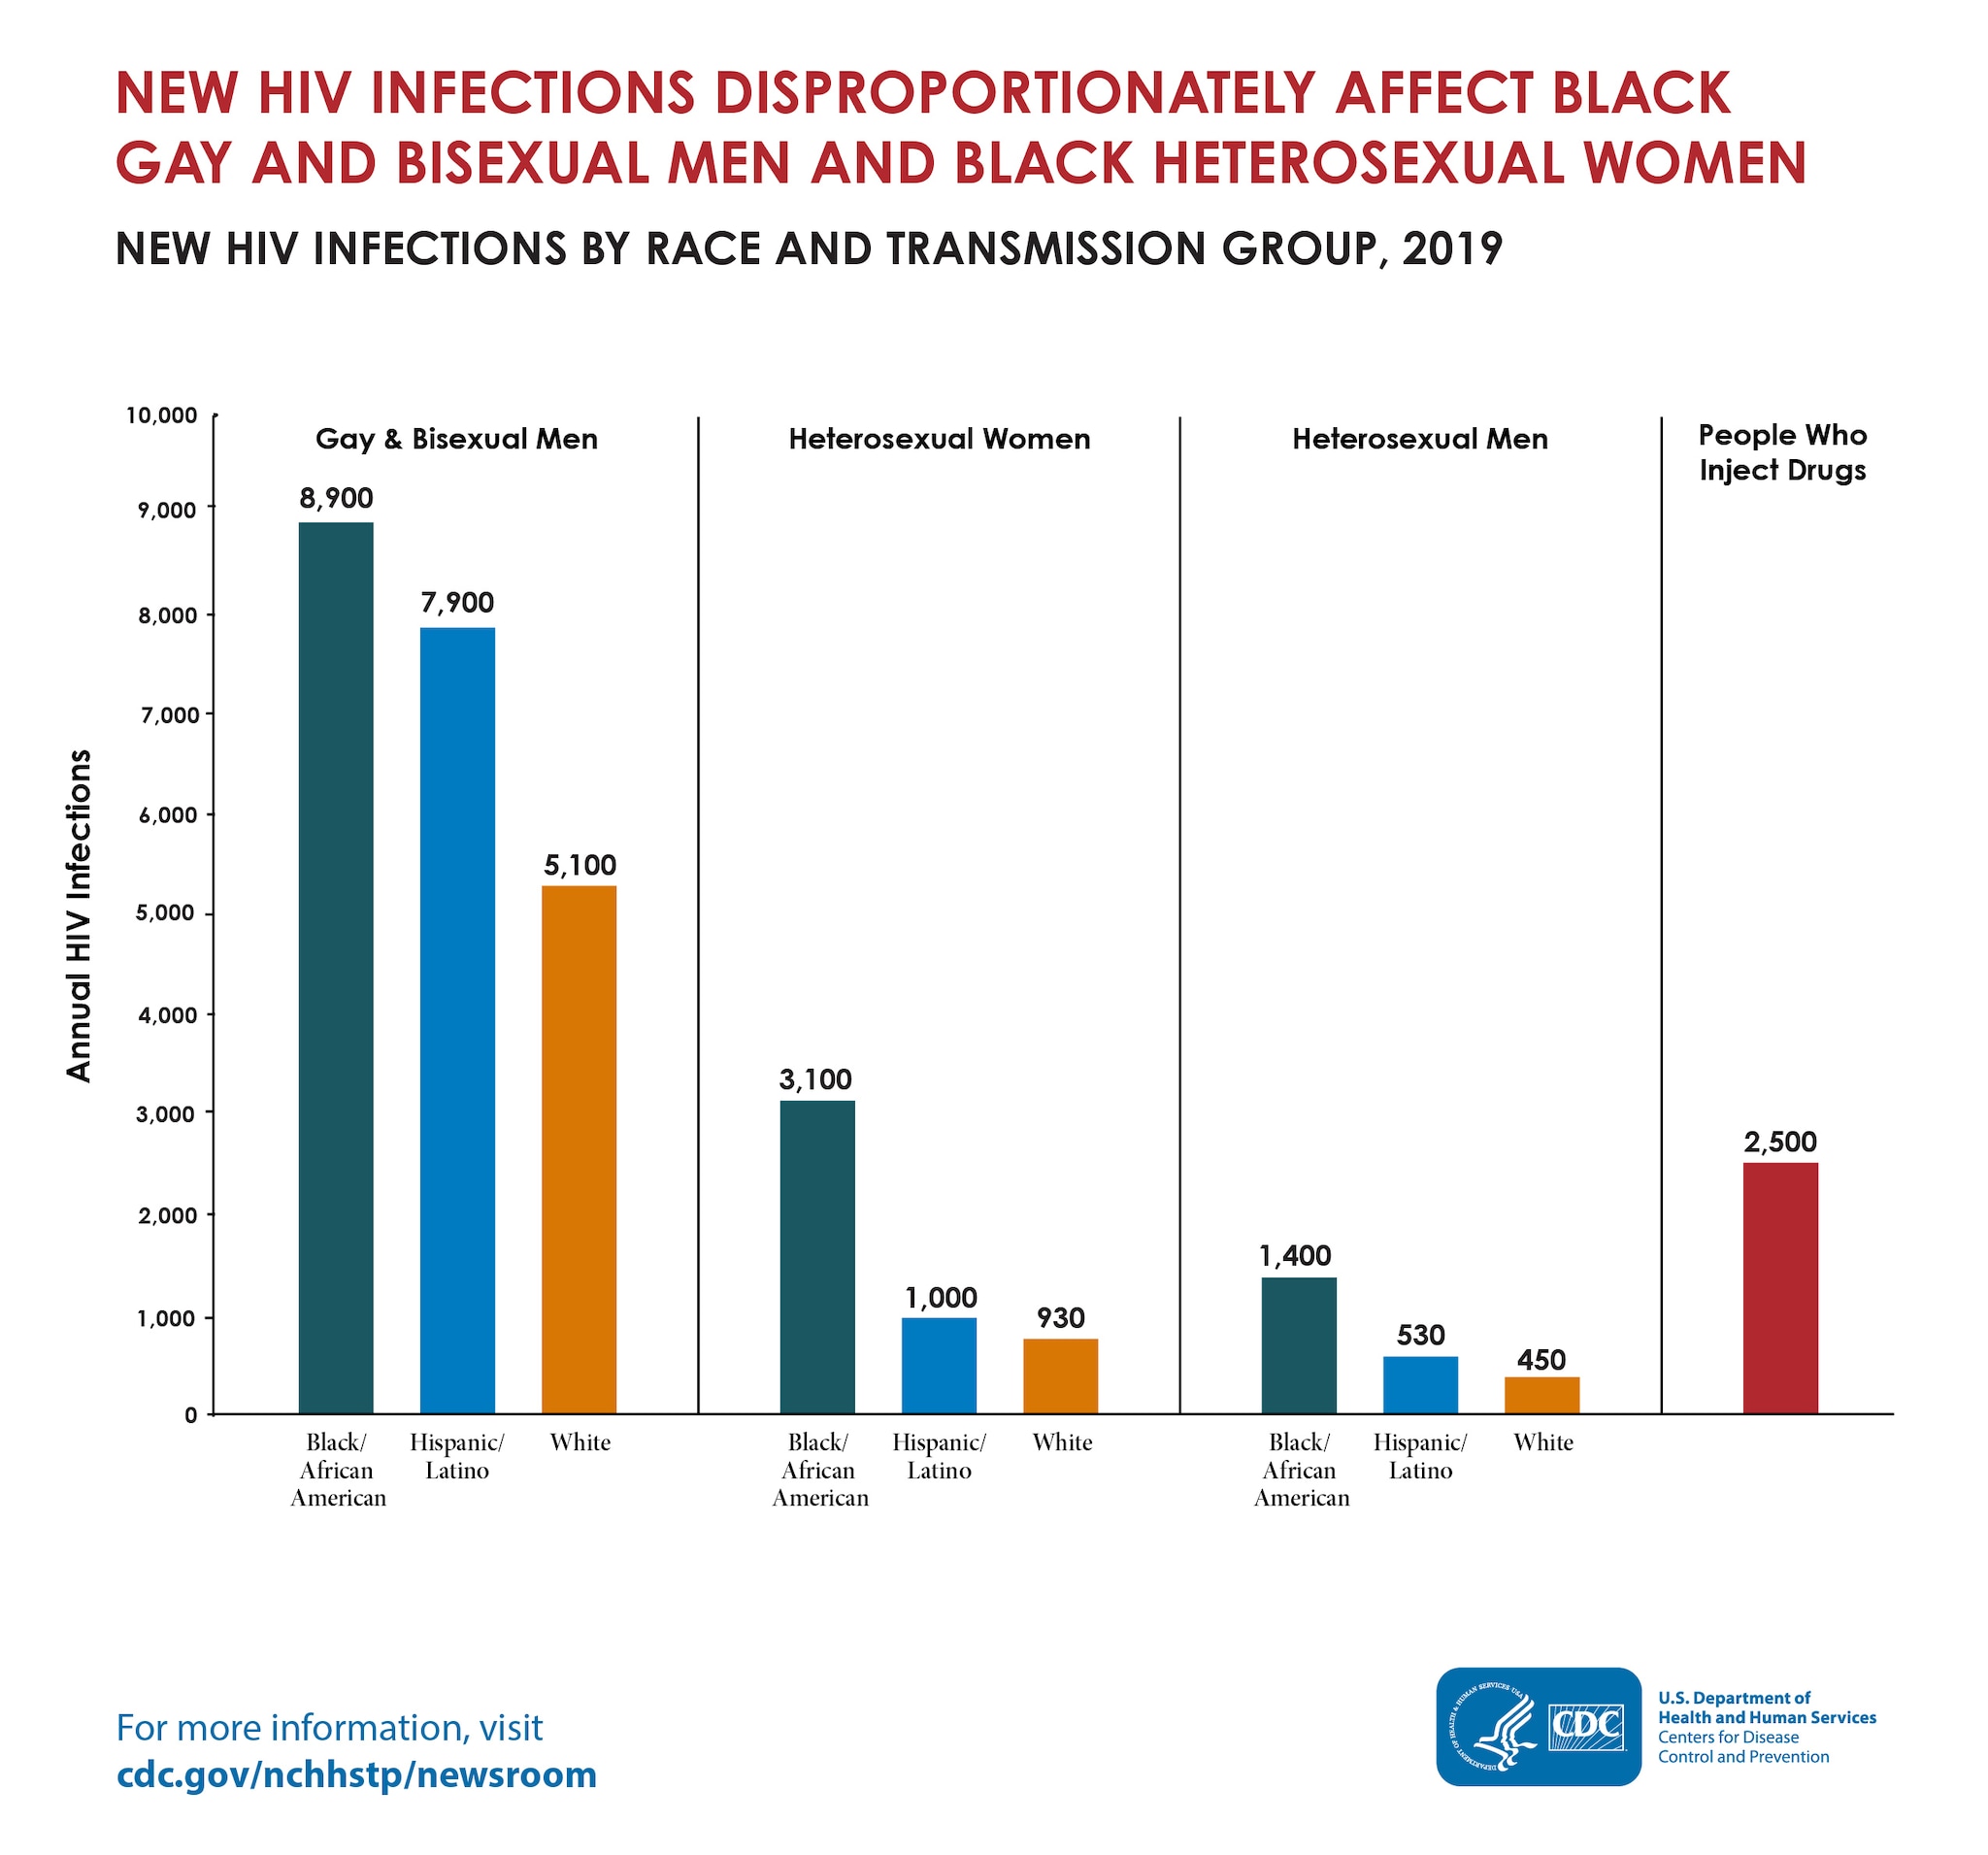 The bar graph shows that in the U.S.in 2019, there were an estimated 8,900 new HIV infections among Black/African American gay and bisexual men; 7,900 among Hispanic/Latino gay and bisexual men; 5,100 among White gay and bisexual men; 3,100 among Black/African American heterosexual women; 1,000 among Hispanic/Latina heterosexual women; 930 among White heterosexual women; 1,400 among Black/African American heterosexual men; 530 among Hispanic/Latino heterosexual men; 450 among White heterosexual men; and 2,500 among people who inject drugs.